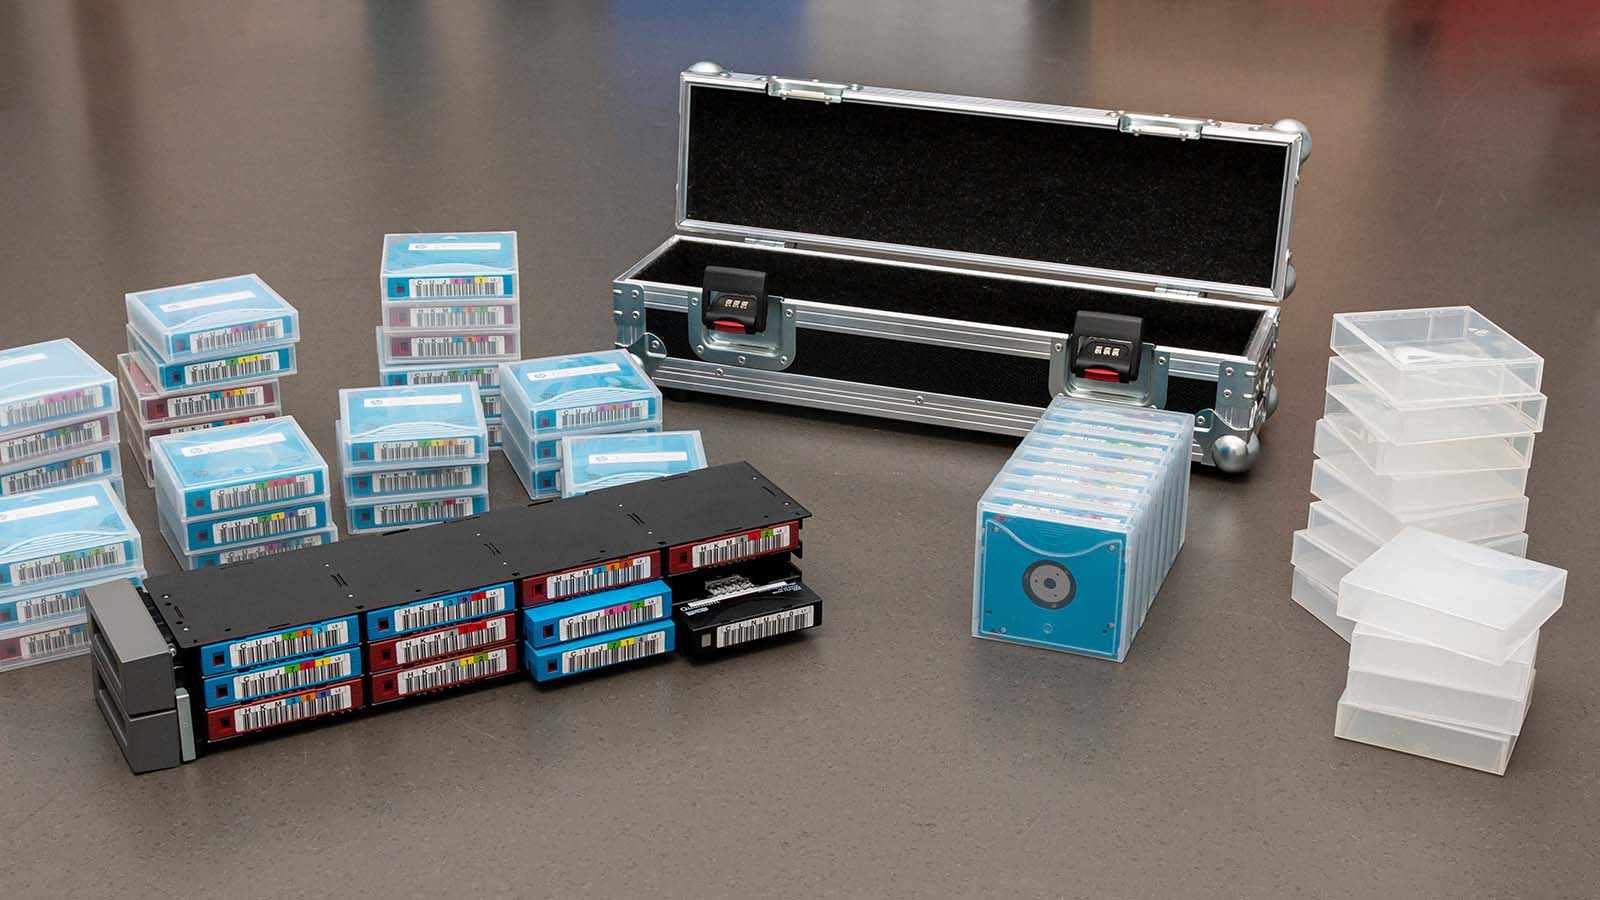 LTO (Linear Tape Open) cartridges are a proven cost-effective storage solution for large archives.